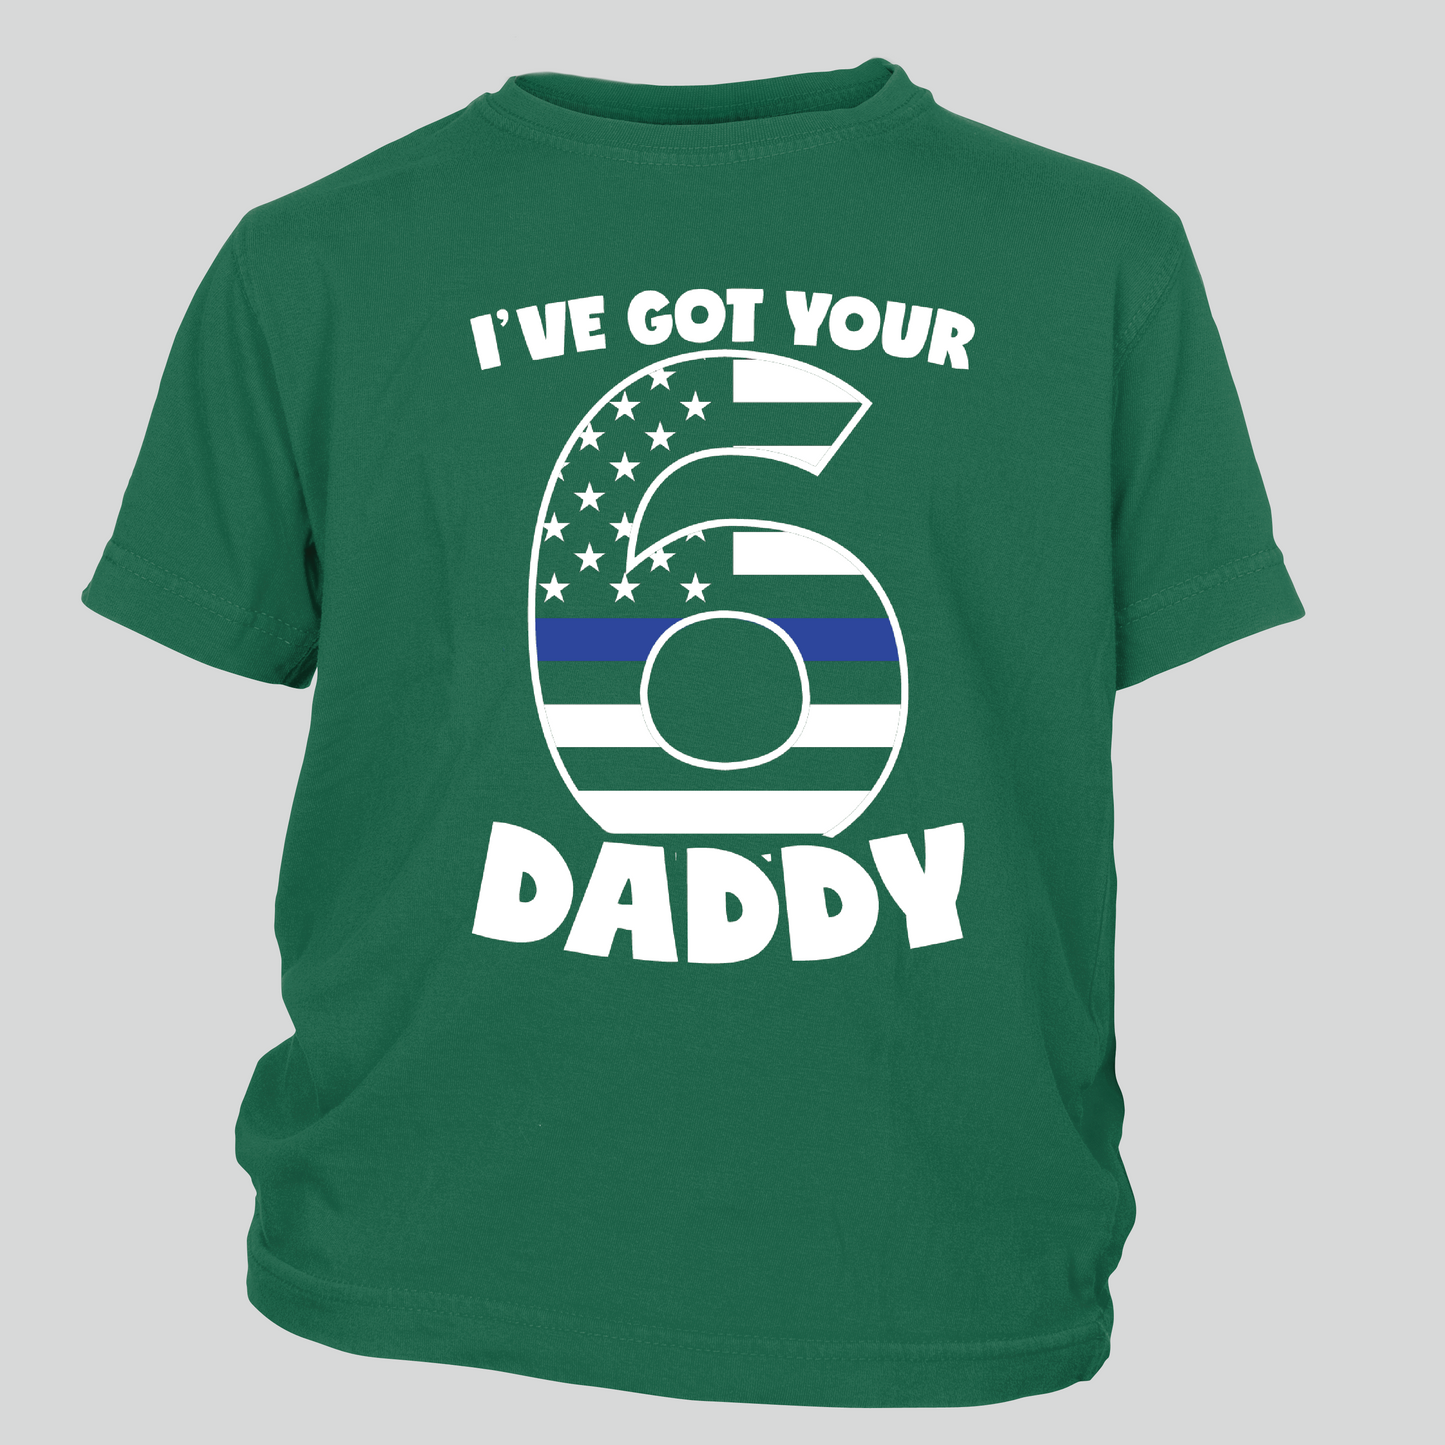 I've Got Your 6 Daddy